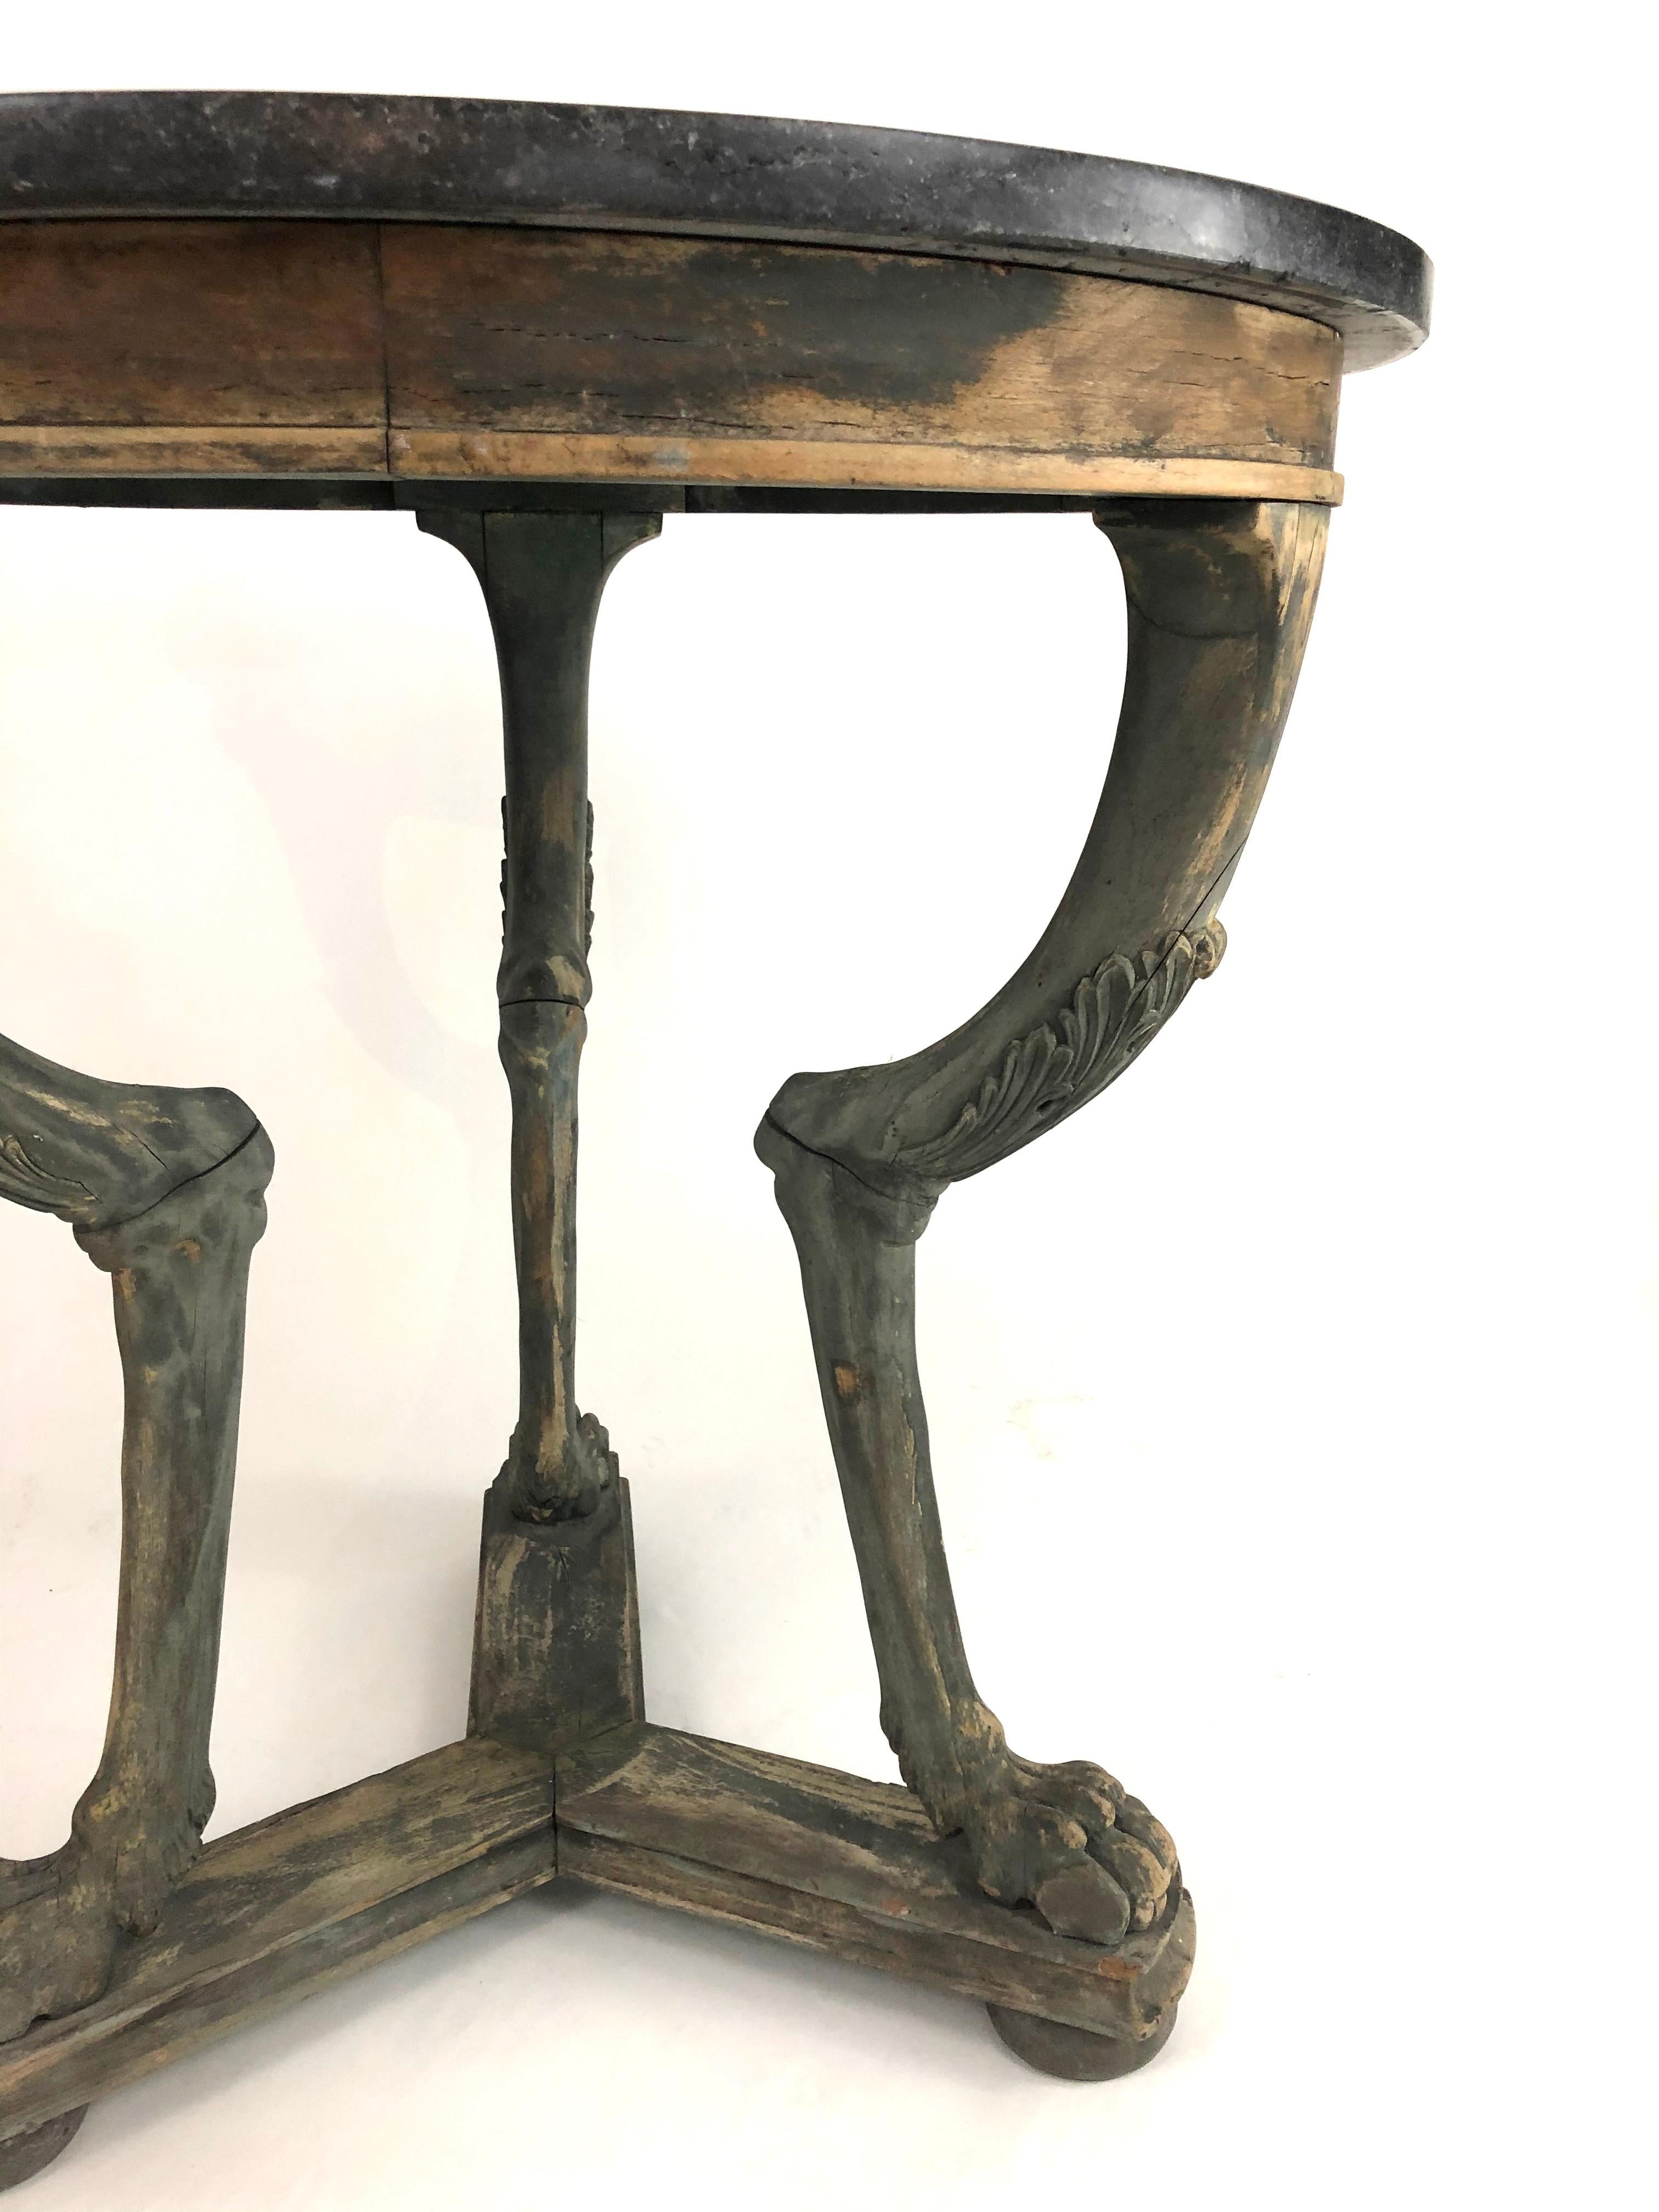 French Neoclassical Marble Top Gueridon Side Table with Animal Paw Feet